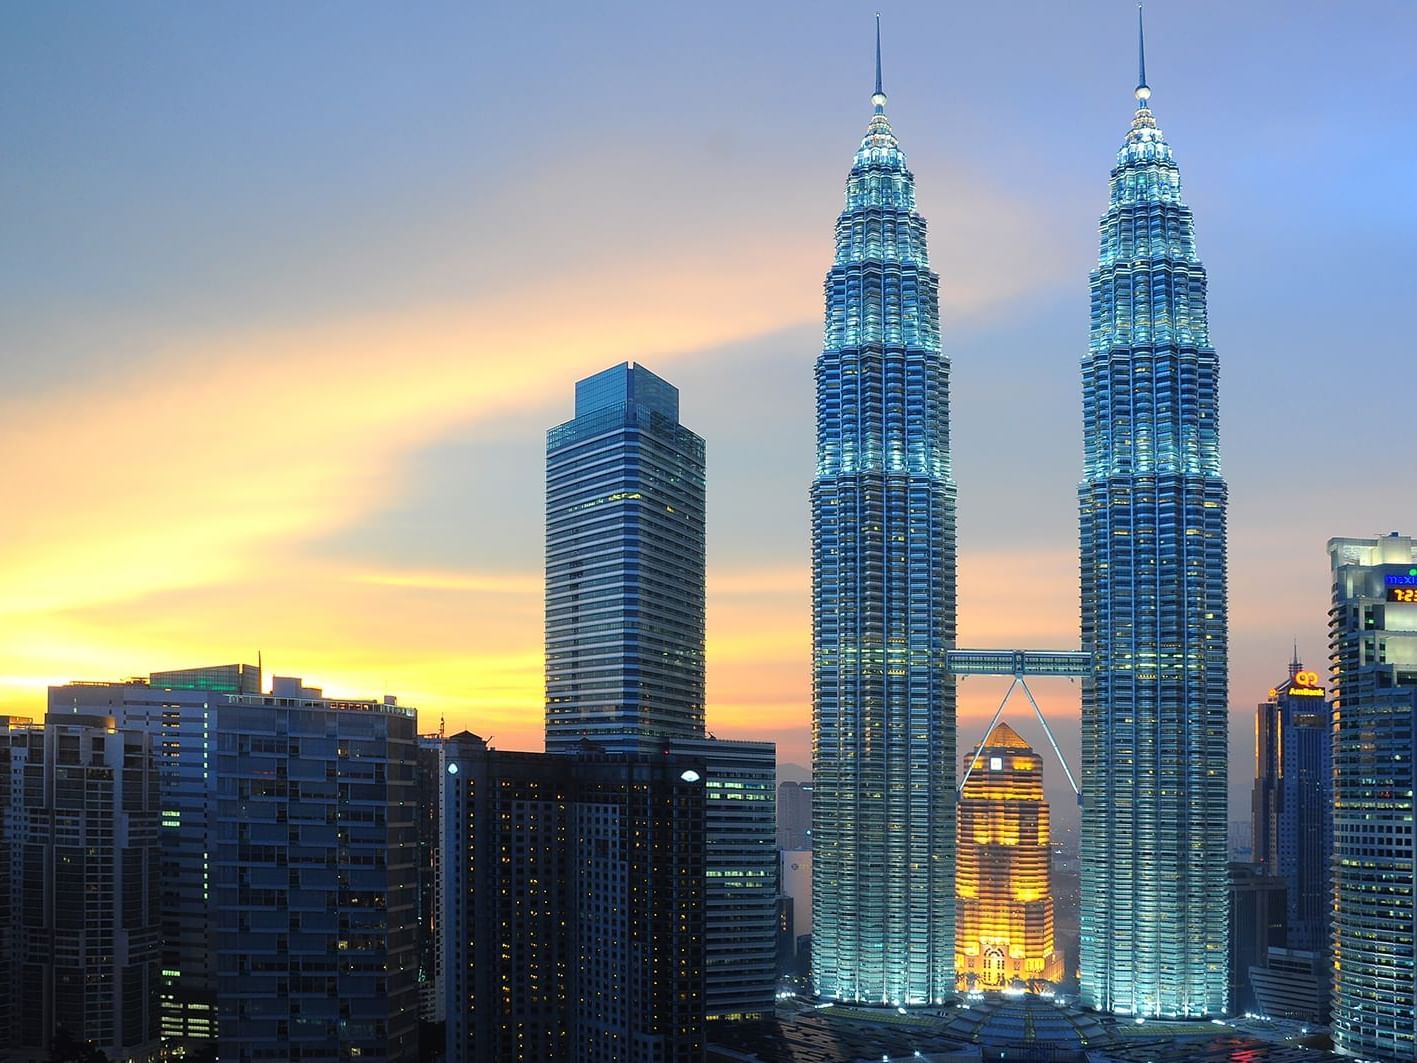 The iconic Petronas Twin Towers
near Gardens hotels & residence